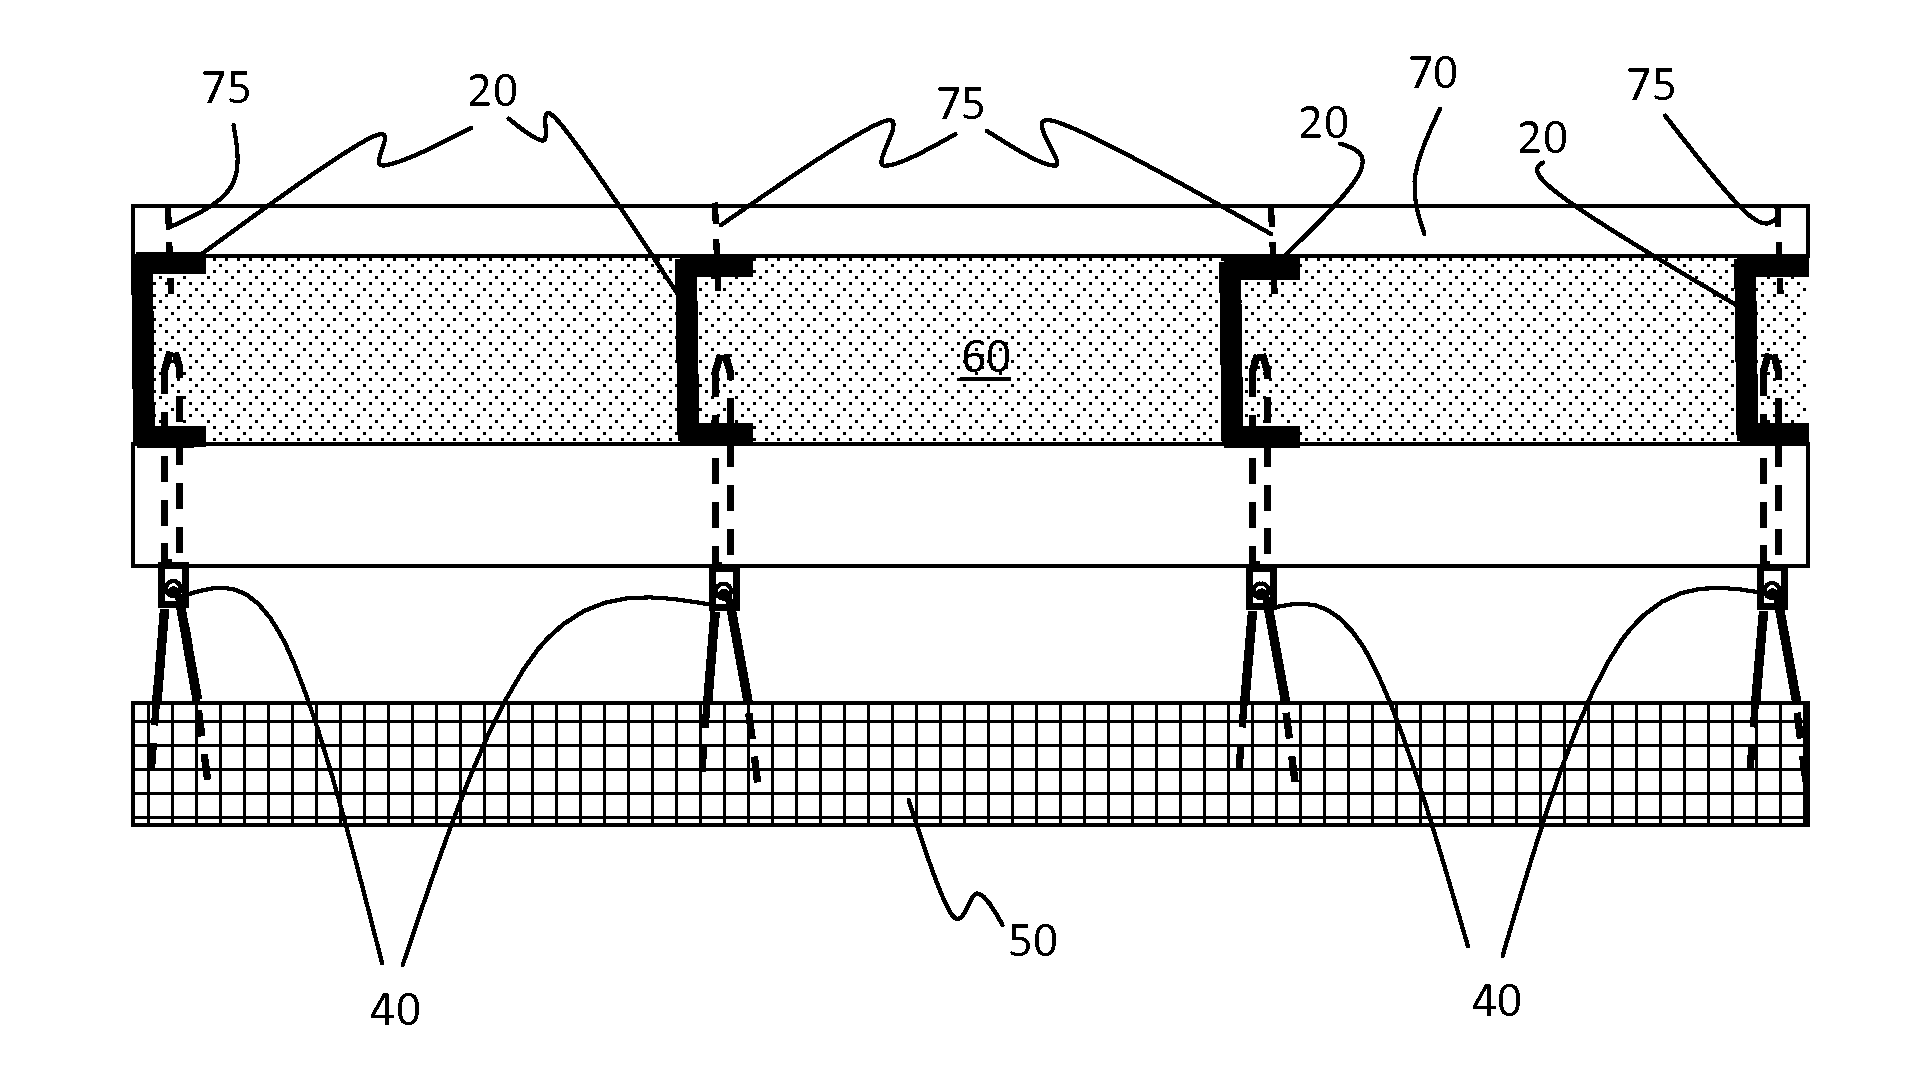 Continuously insulated wall assembly